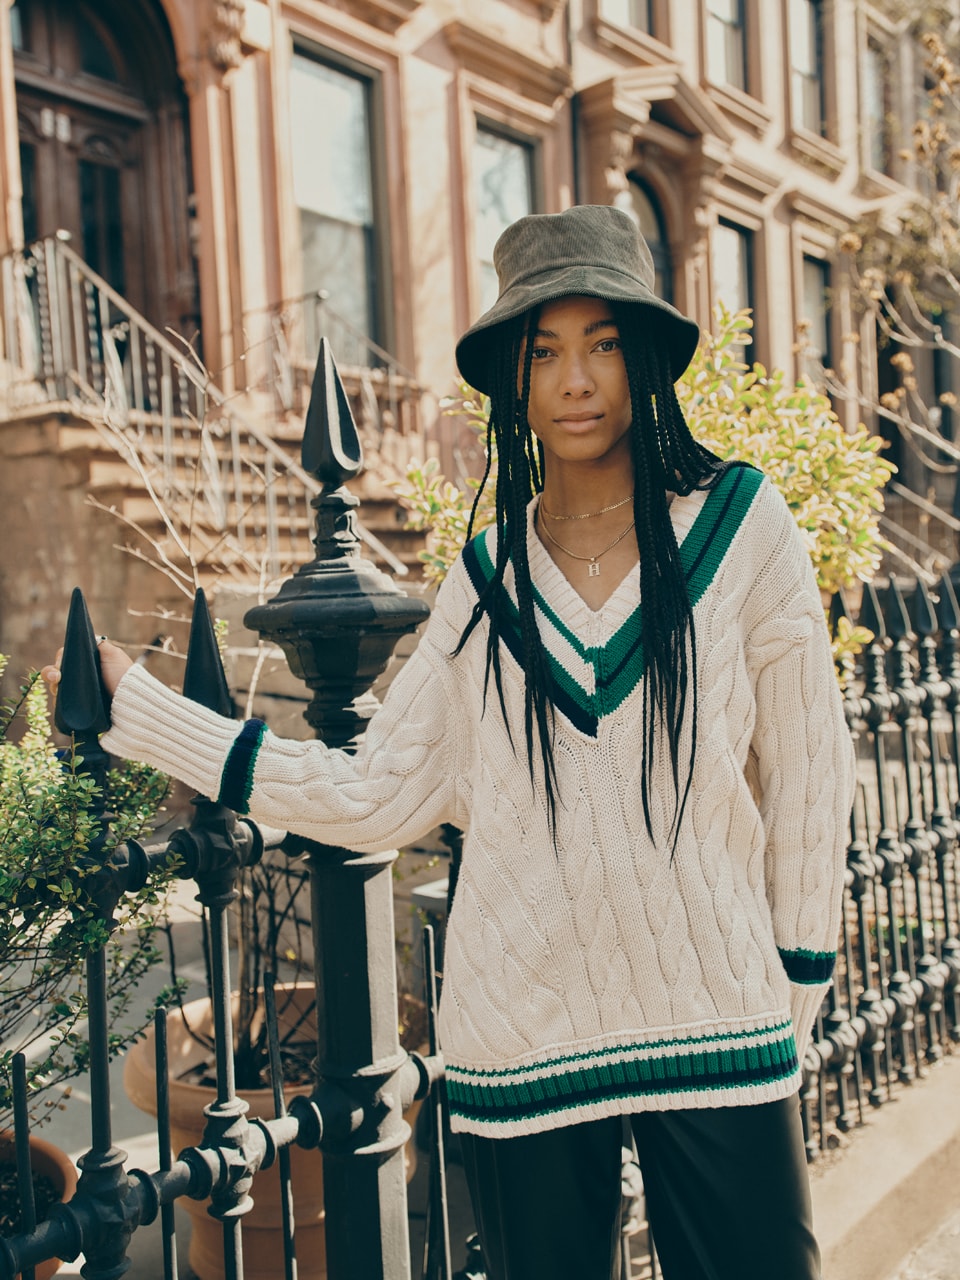 Banana Republic Launches New BR Athletics Line Enlisting Micaiah Carter to Lens the Campaign